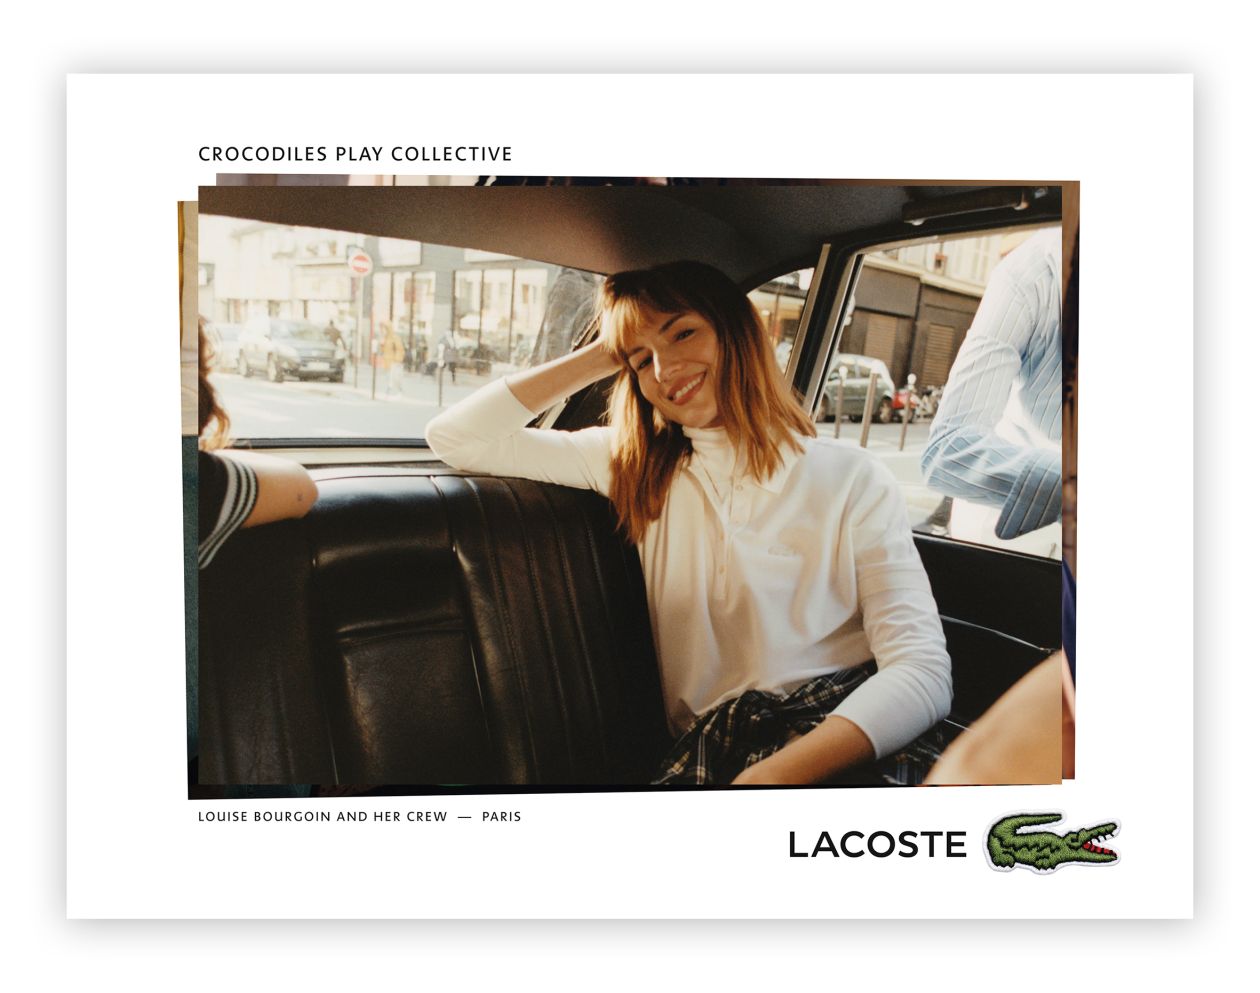 2021 27106 47823 07louise Bourgoin Lacoste Crocodiles Play Collective